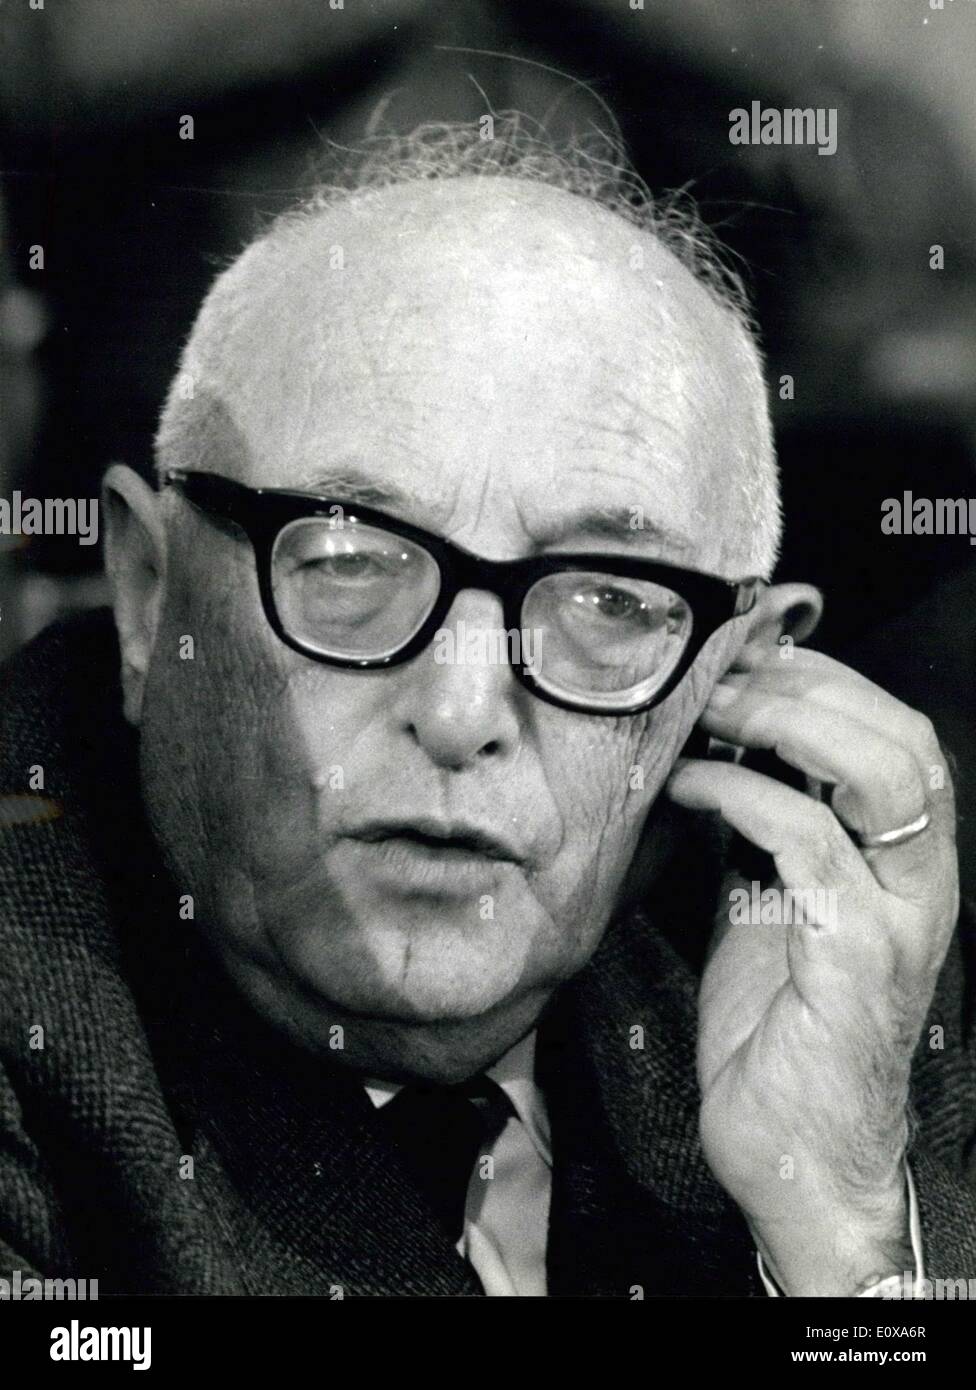 Nov. 10, 1965 - The 36th Assembly of Italian Socialist Party (P.S.I) was opened today in Rome, at the Congress Palace. Photo Shows: The leader of the socialism hon. Pietro Nenni, 74 year-old, former secretary of the party and now Vice Prime Minister of the Government. Stock Photo